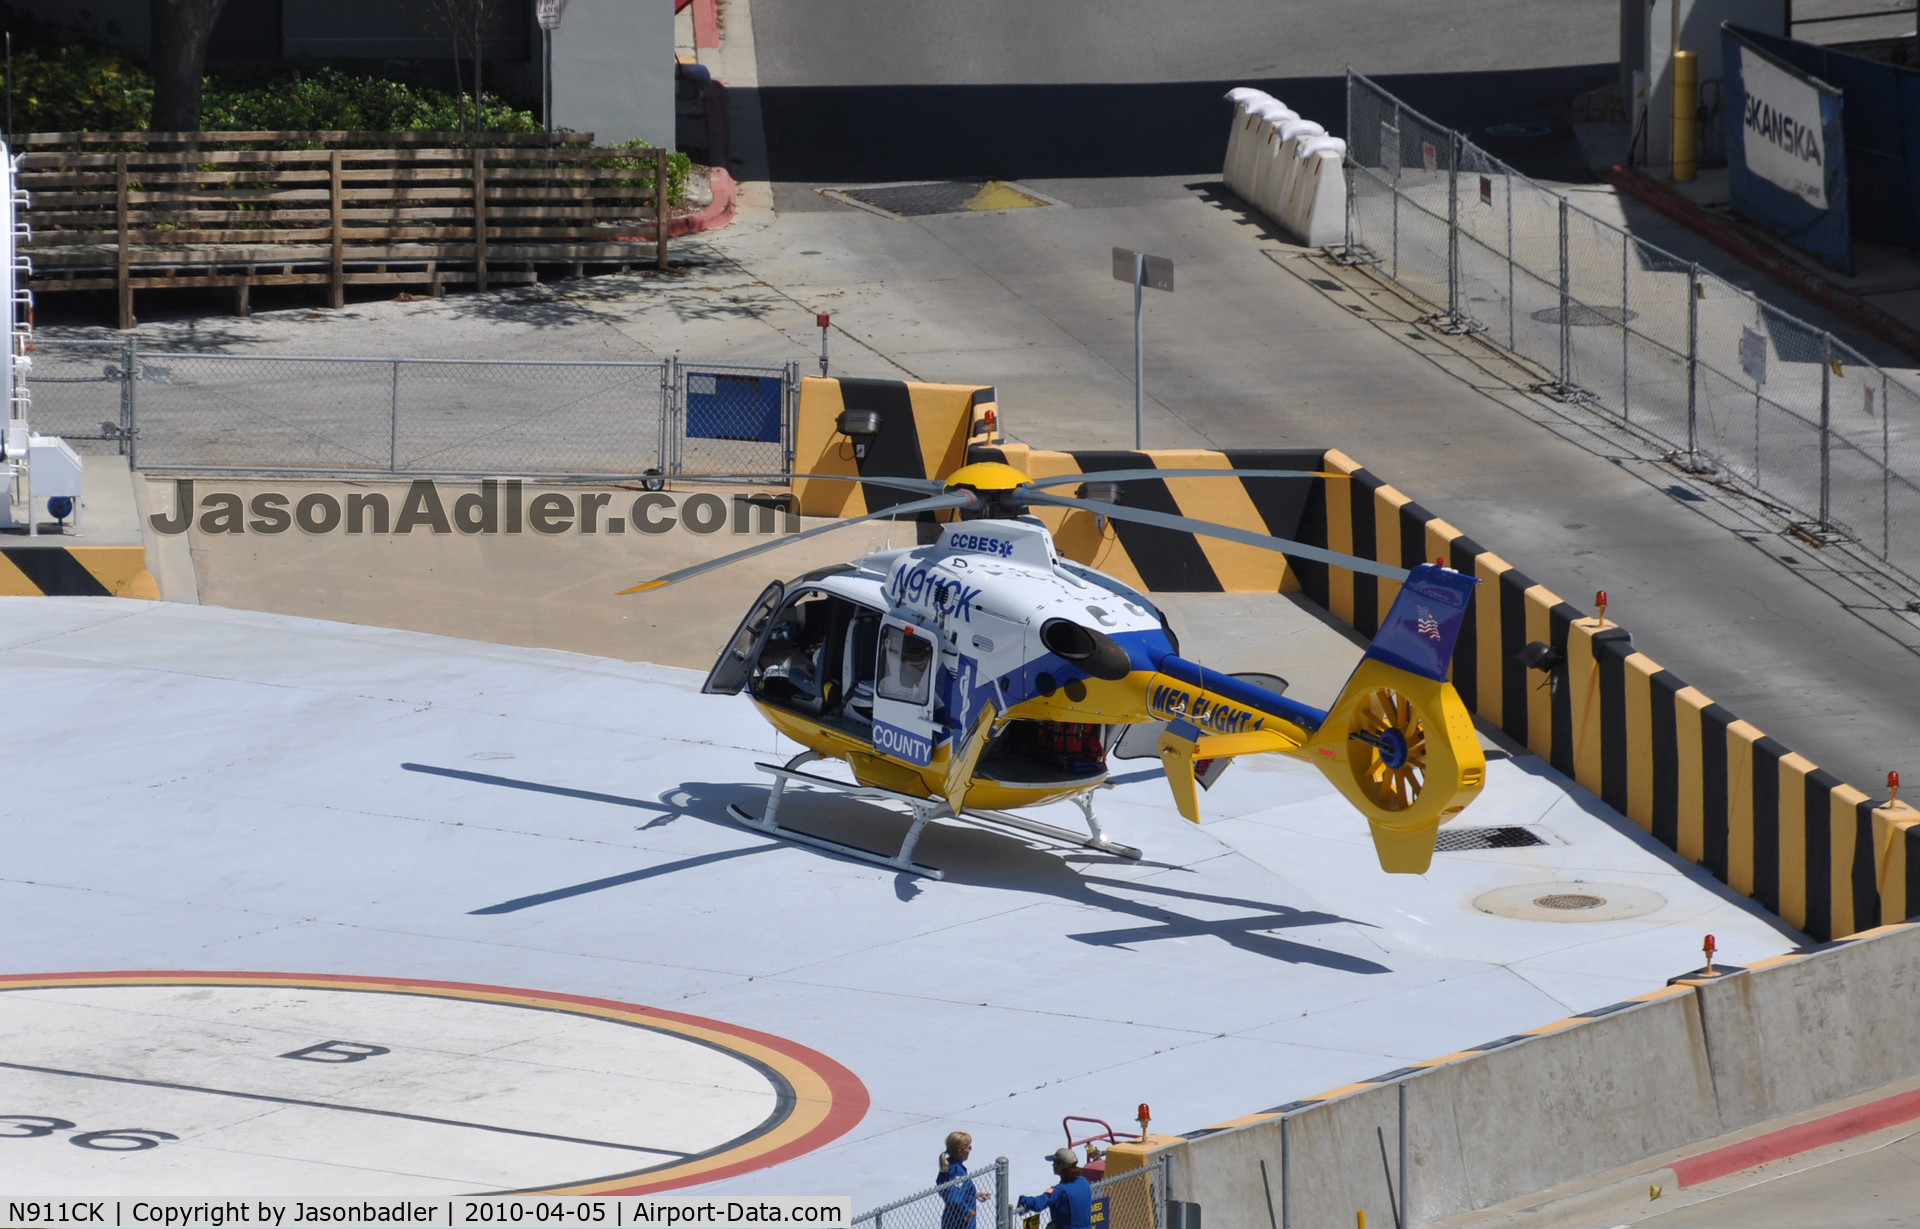 N911CK, 2000 Eurocopter EC-135T-1 C/N 0138, This Eurocopter arrived at Tampa General Hospital at 14:00. This was the first time I have seen that helicopter at Tampa General.